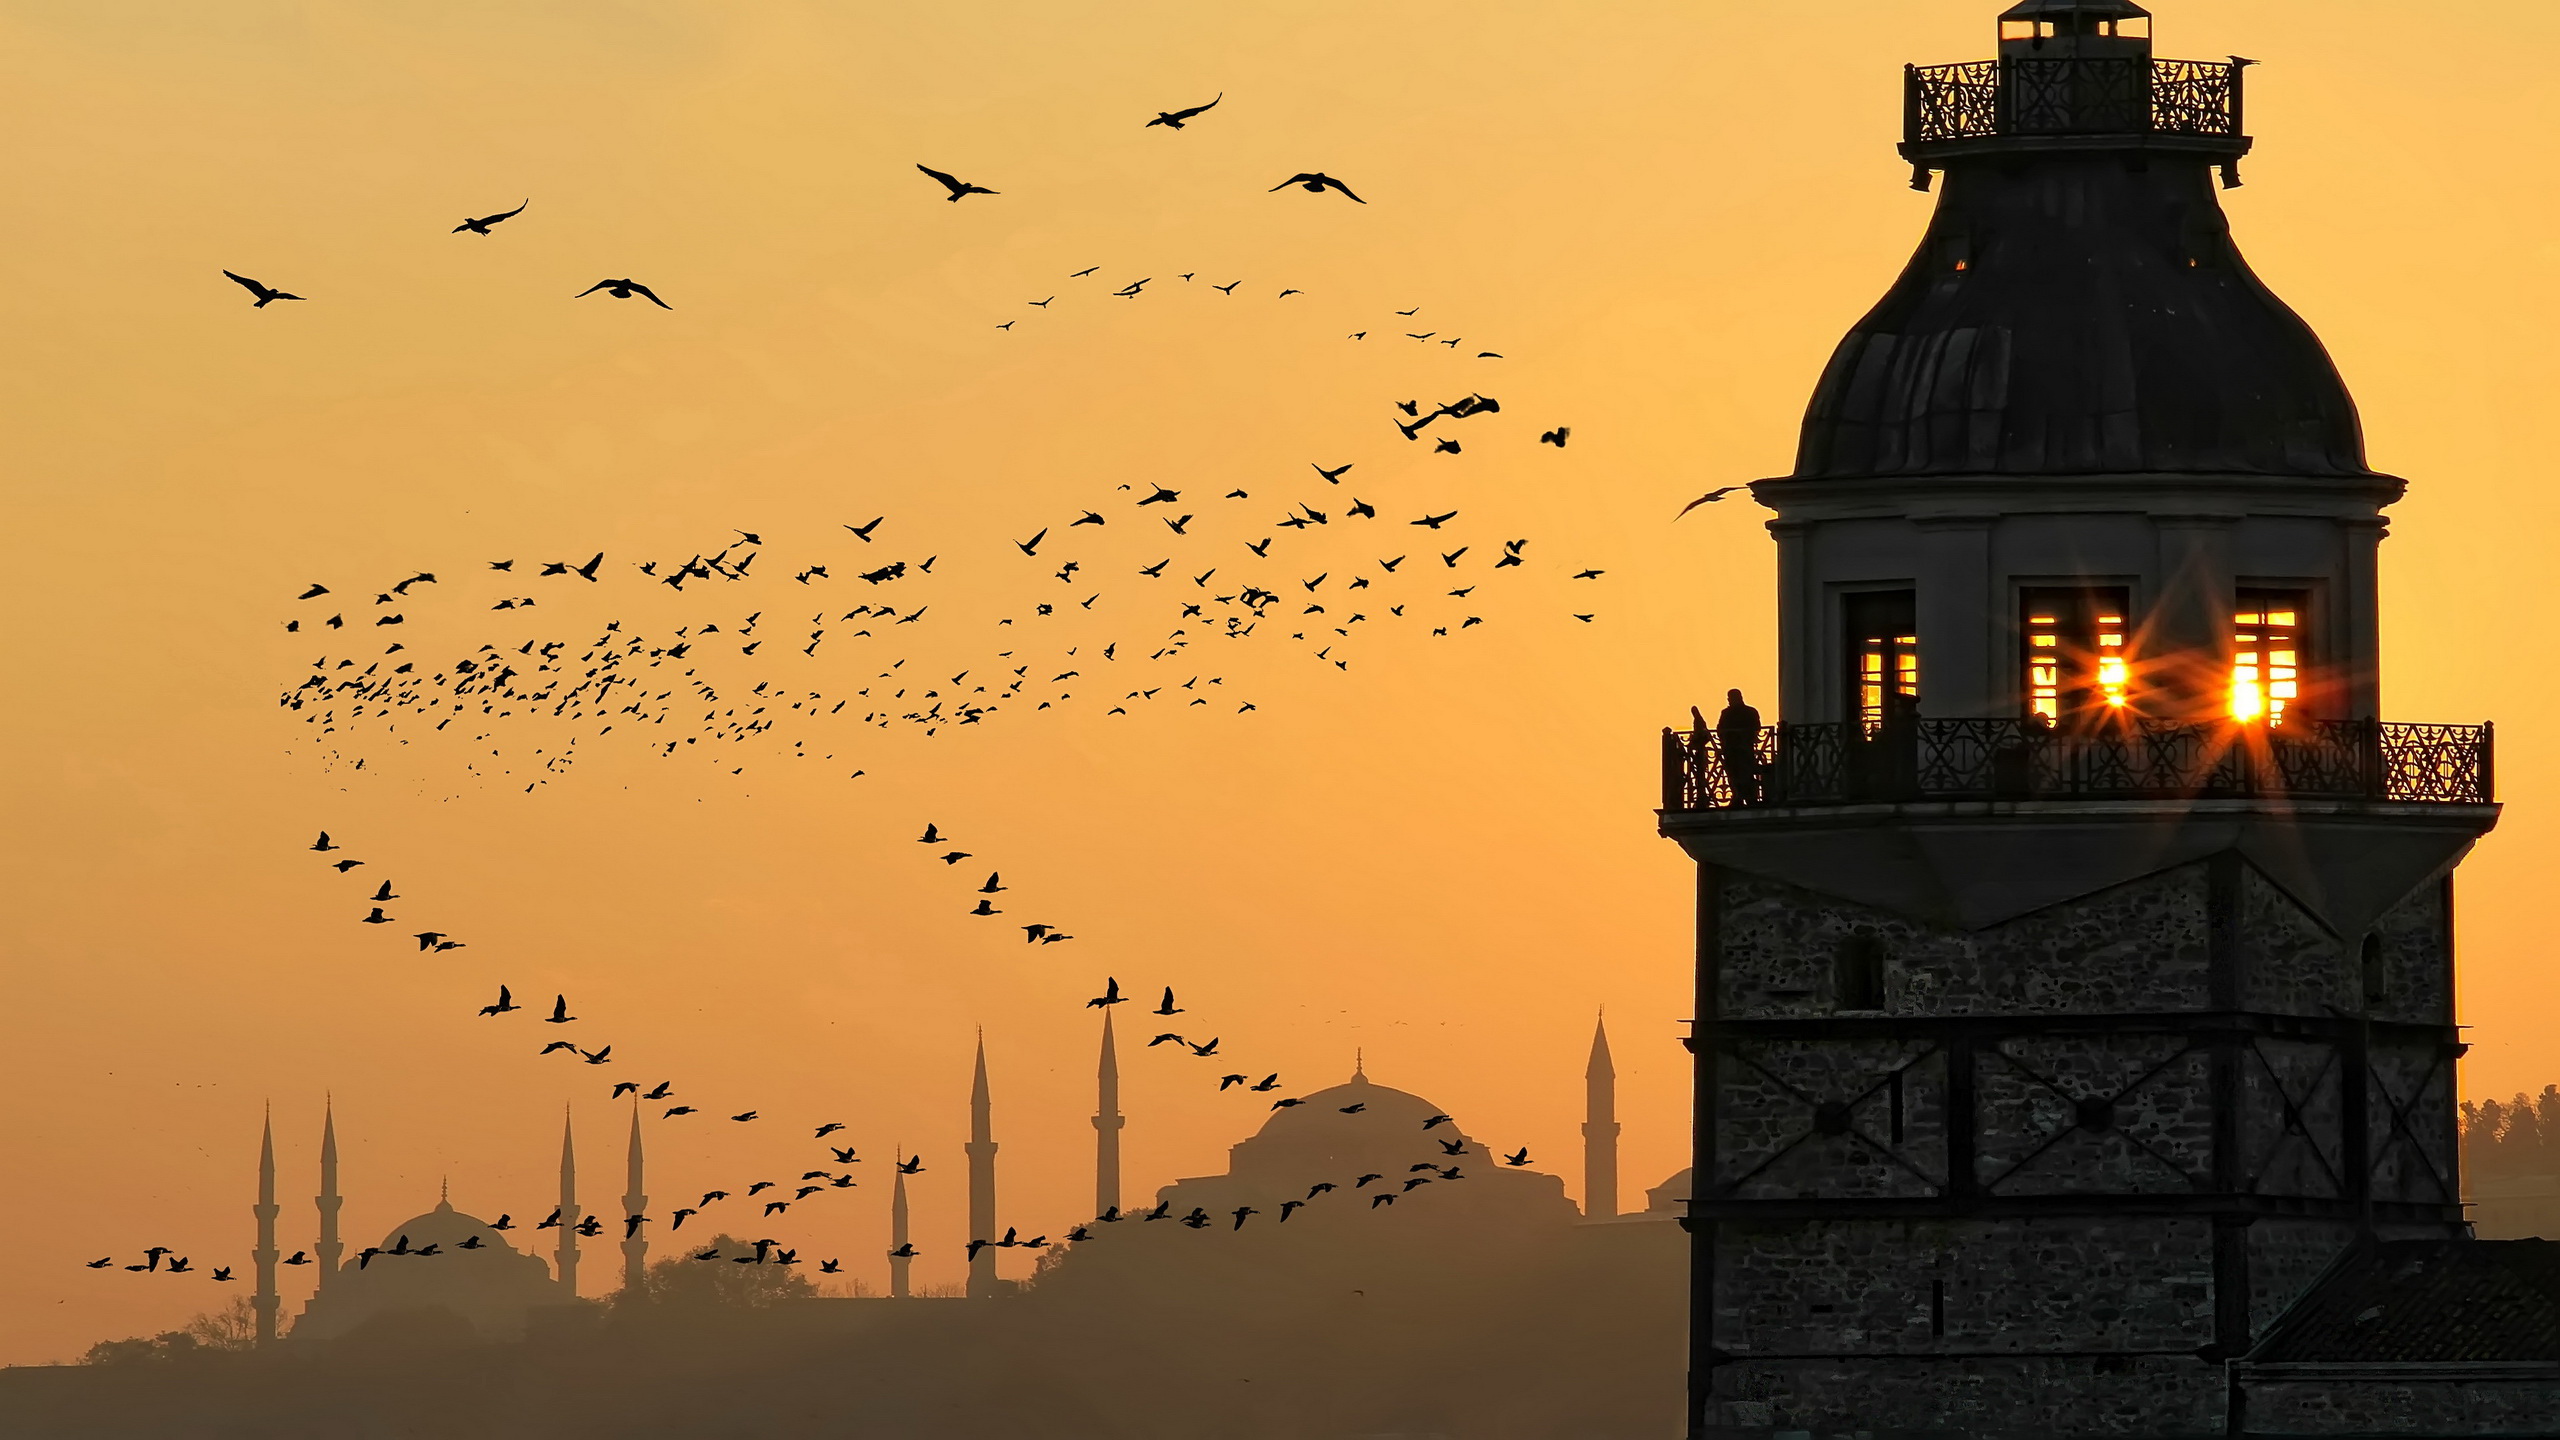 istanbul, man made, cities